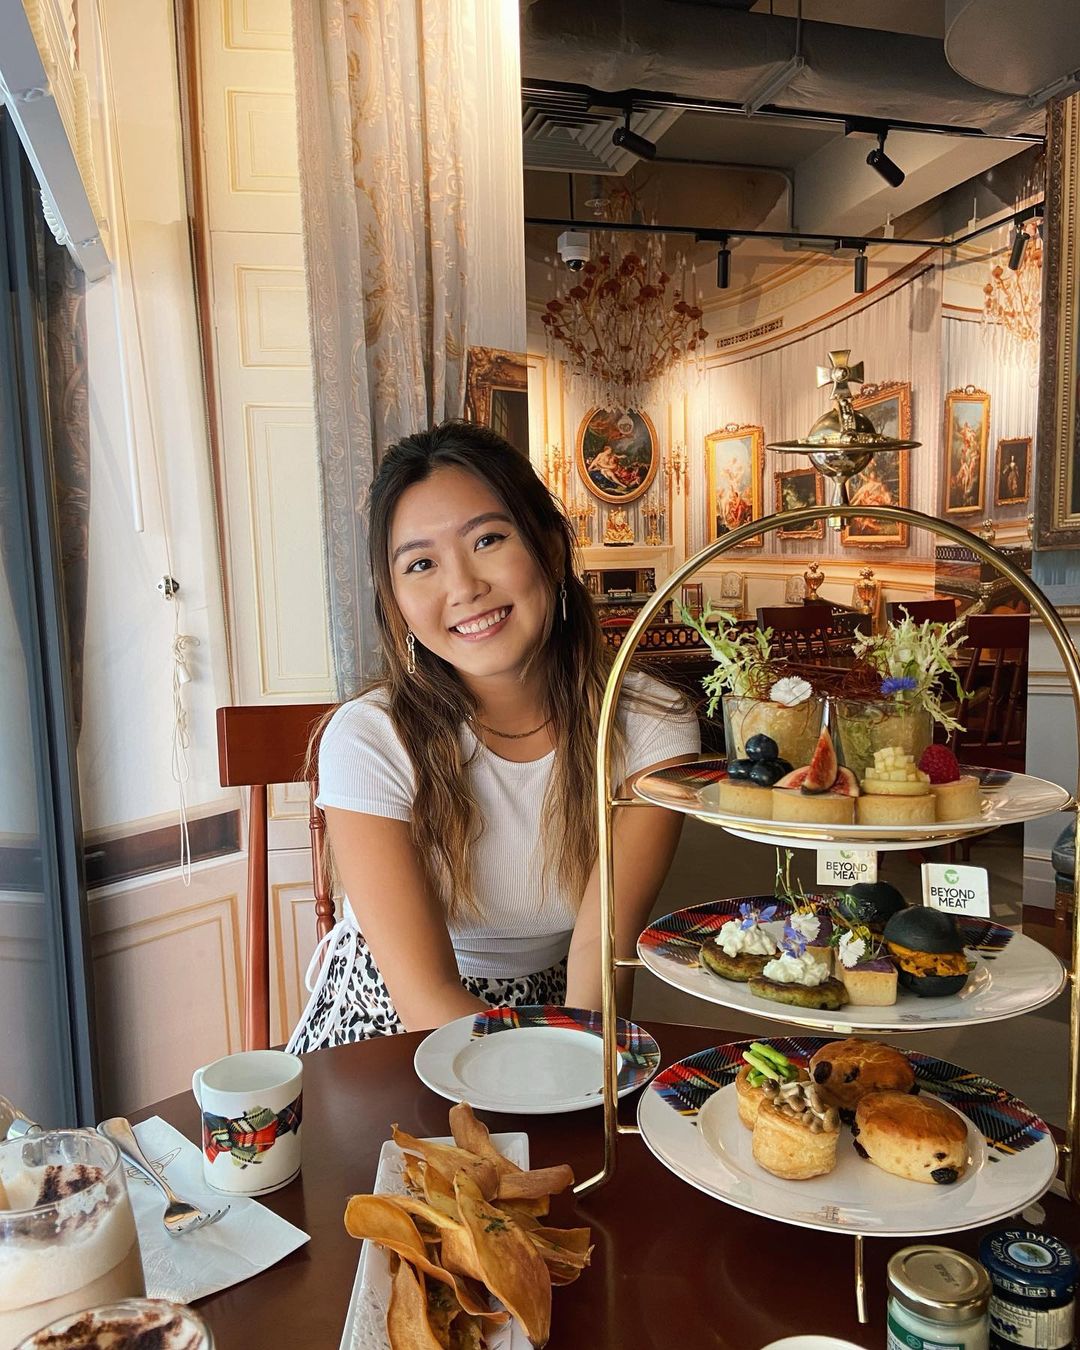 The Vivienne Westwood brand coffee shop serves afternoon tea and light snacks.  Vivienne Westwood is a high-end fashion brand based in Hong Kong and used to 